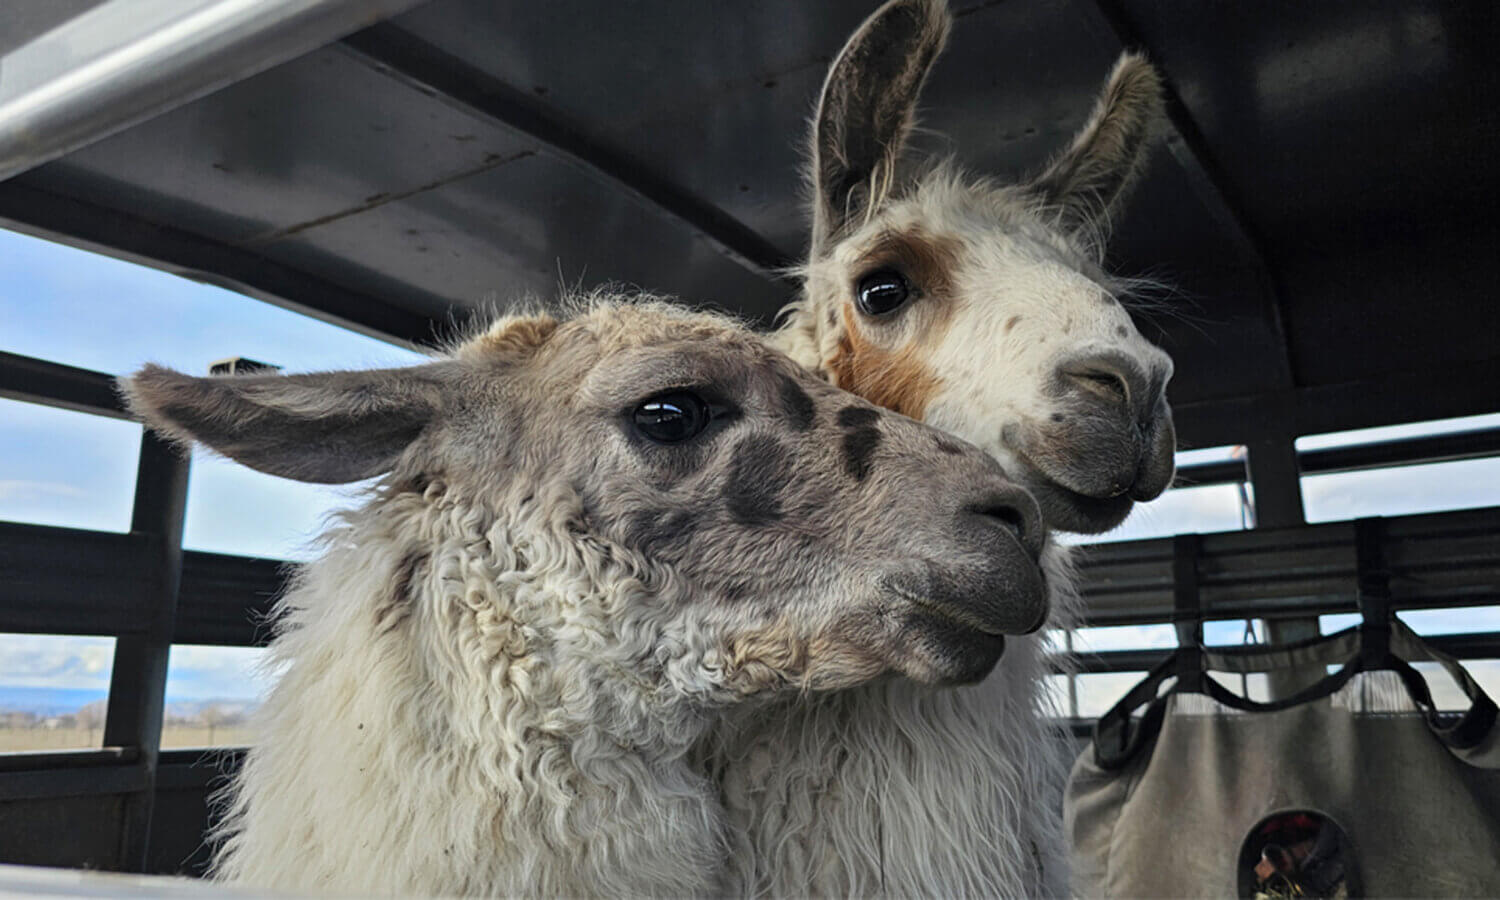 Two llamas looking curiously at the camera from inside a trailer after being rescued.